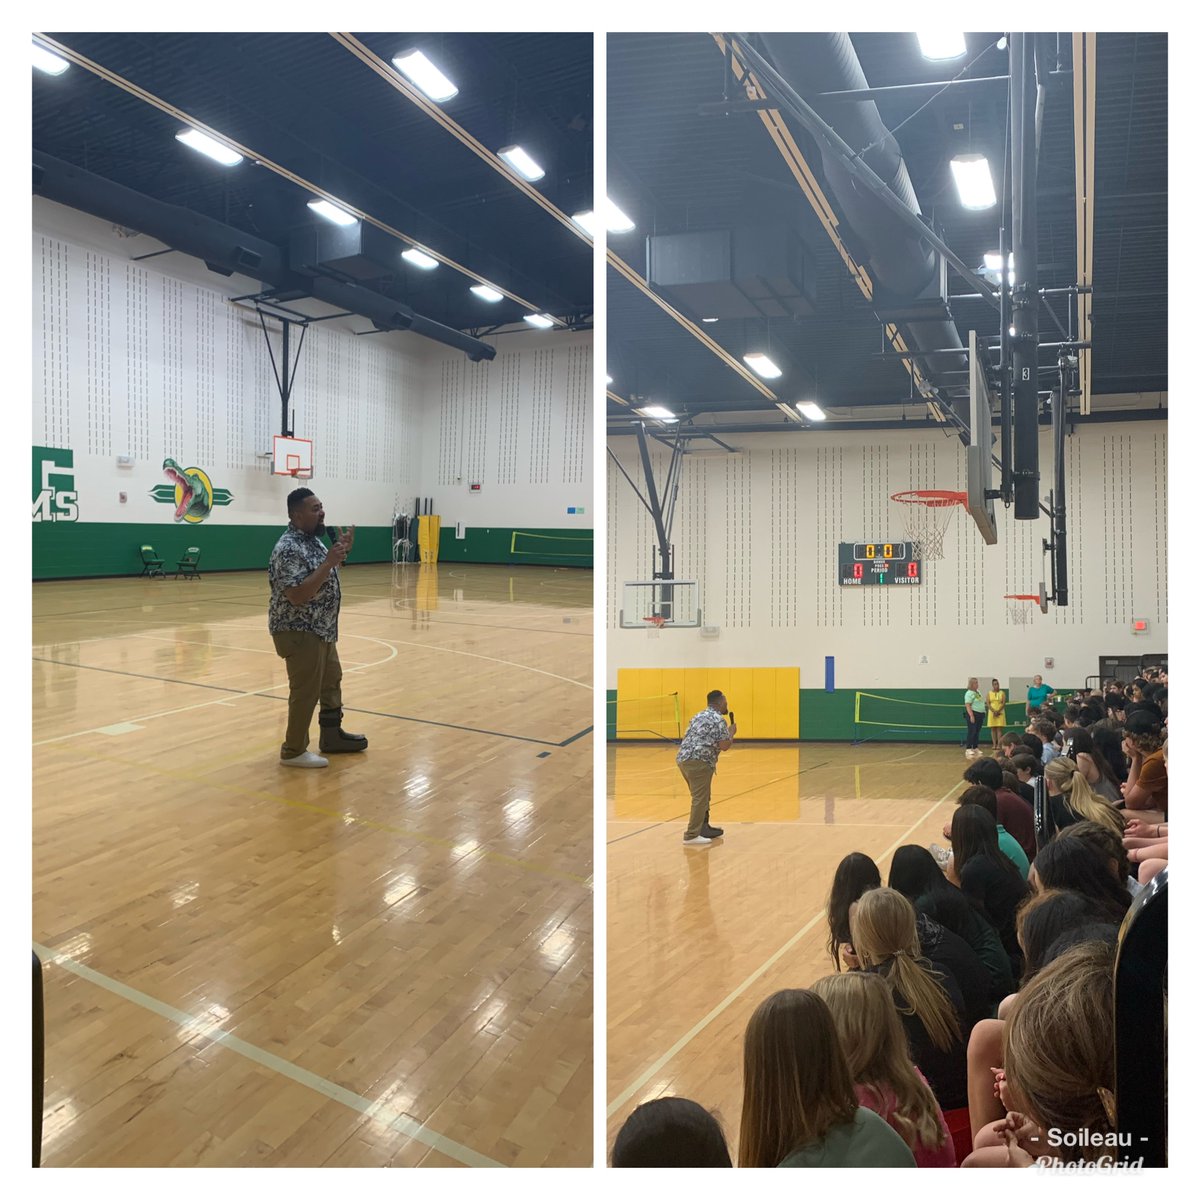 8th grade had an amazing speaker today, Mr. Lonnie Tucker! Don’t waste your moments!